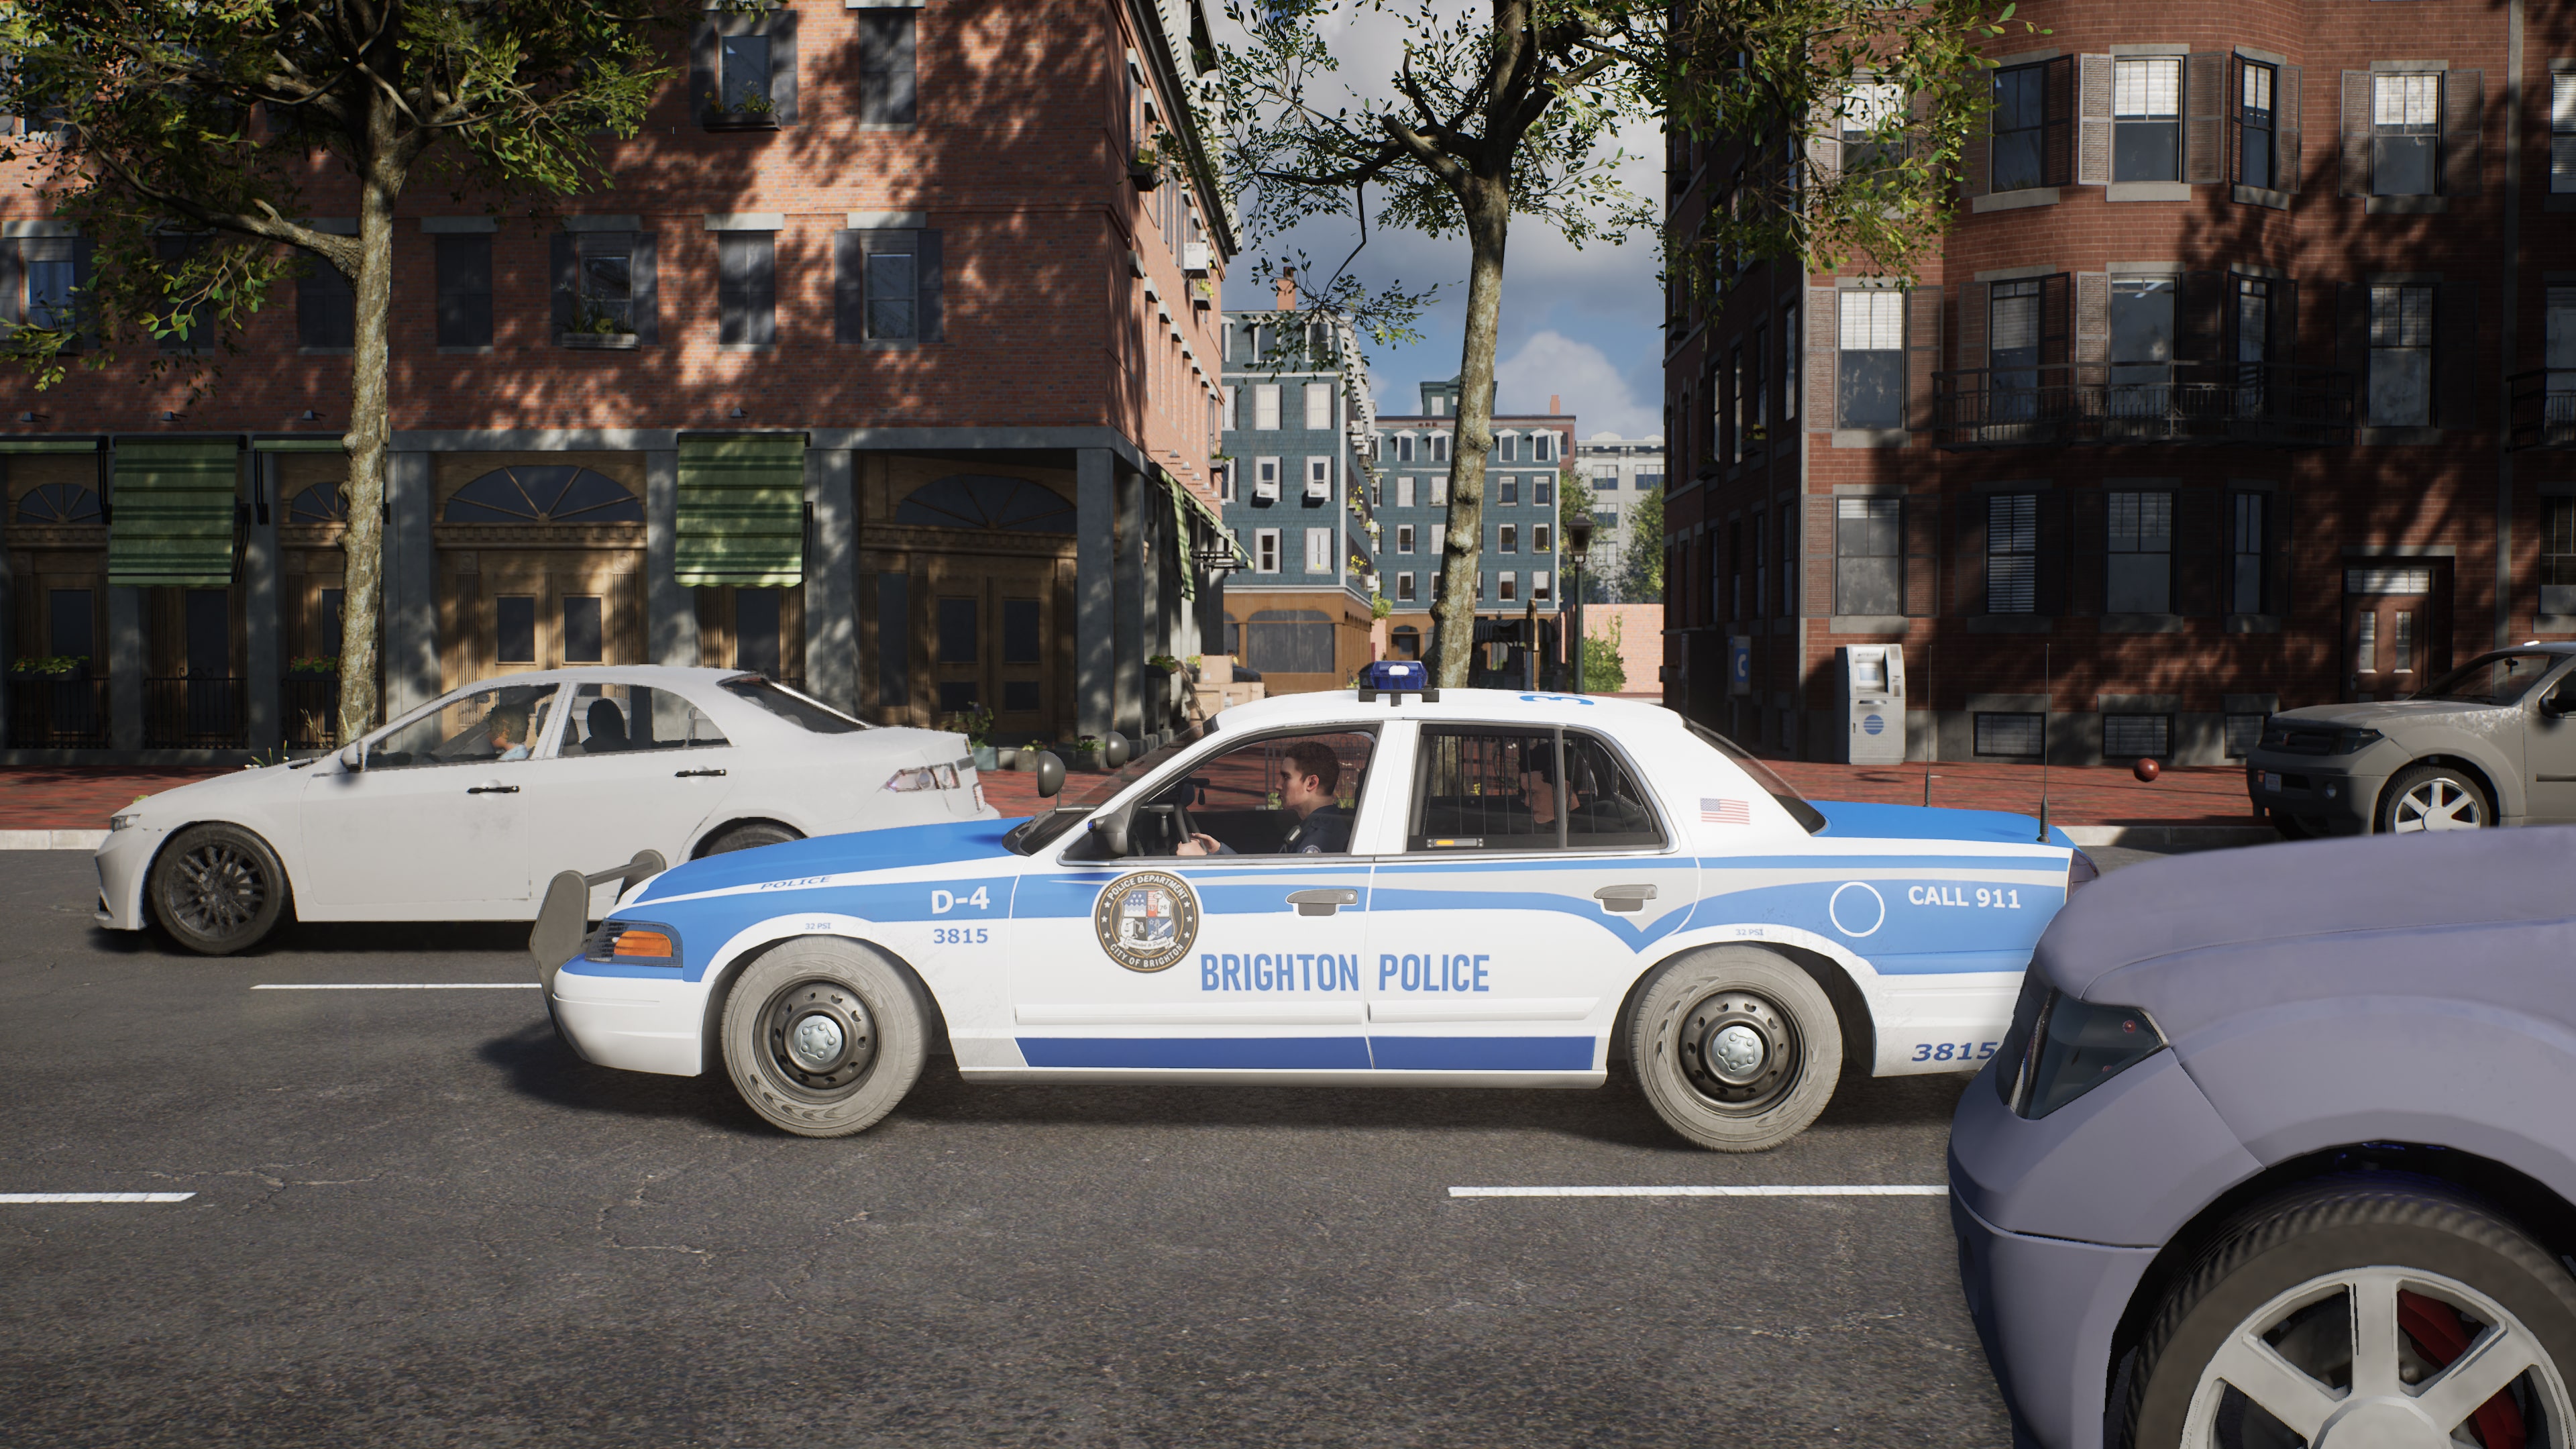 Vehicle DLC Patrol Police : Officers Simulator: Police Compact